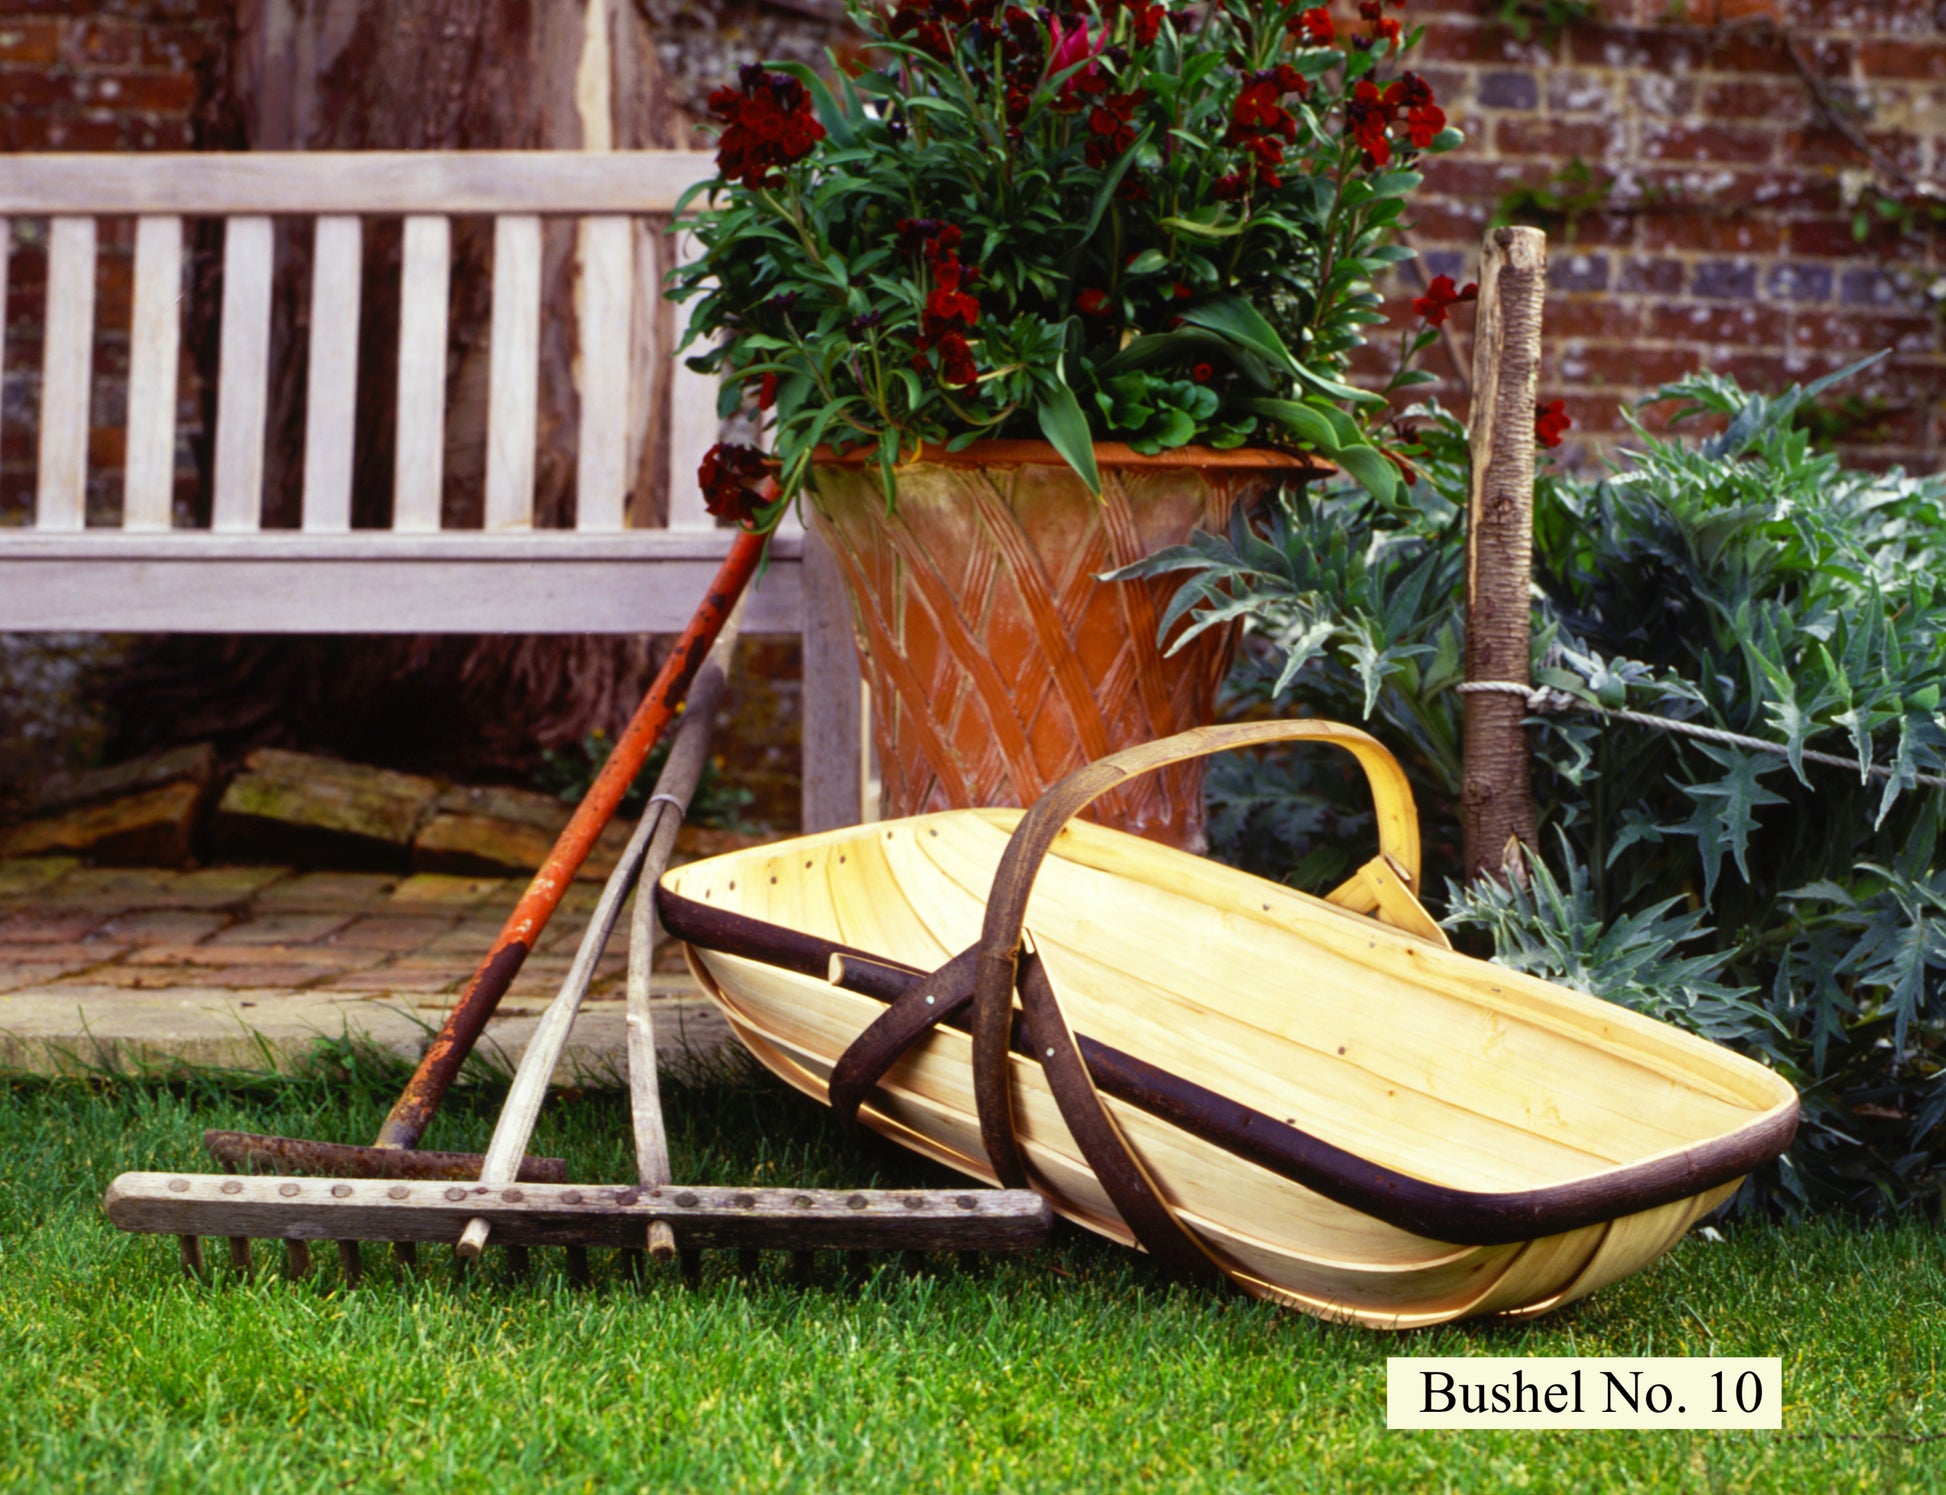 Sussex Garden Trug No. 10 (full Bushel), made from traditional, sustainable materials in Herstmonceux